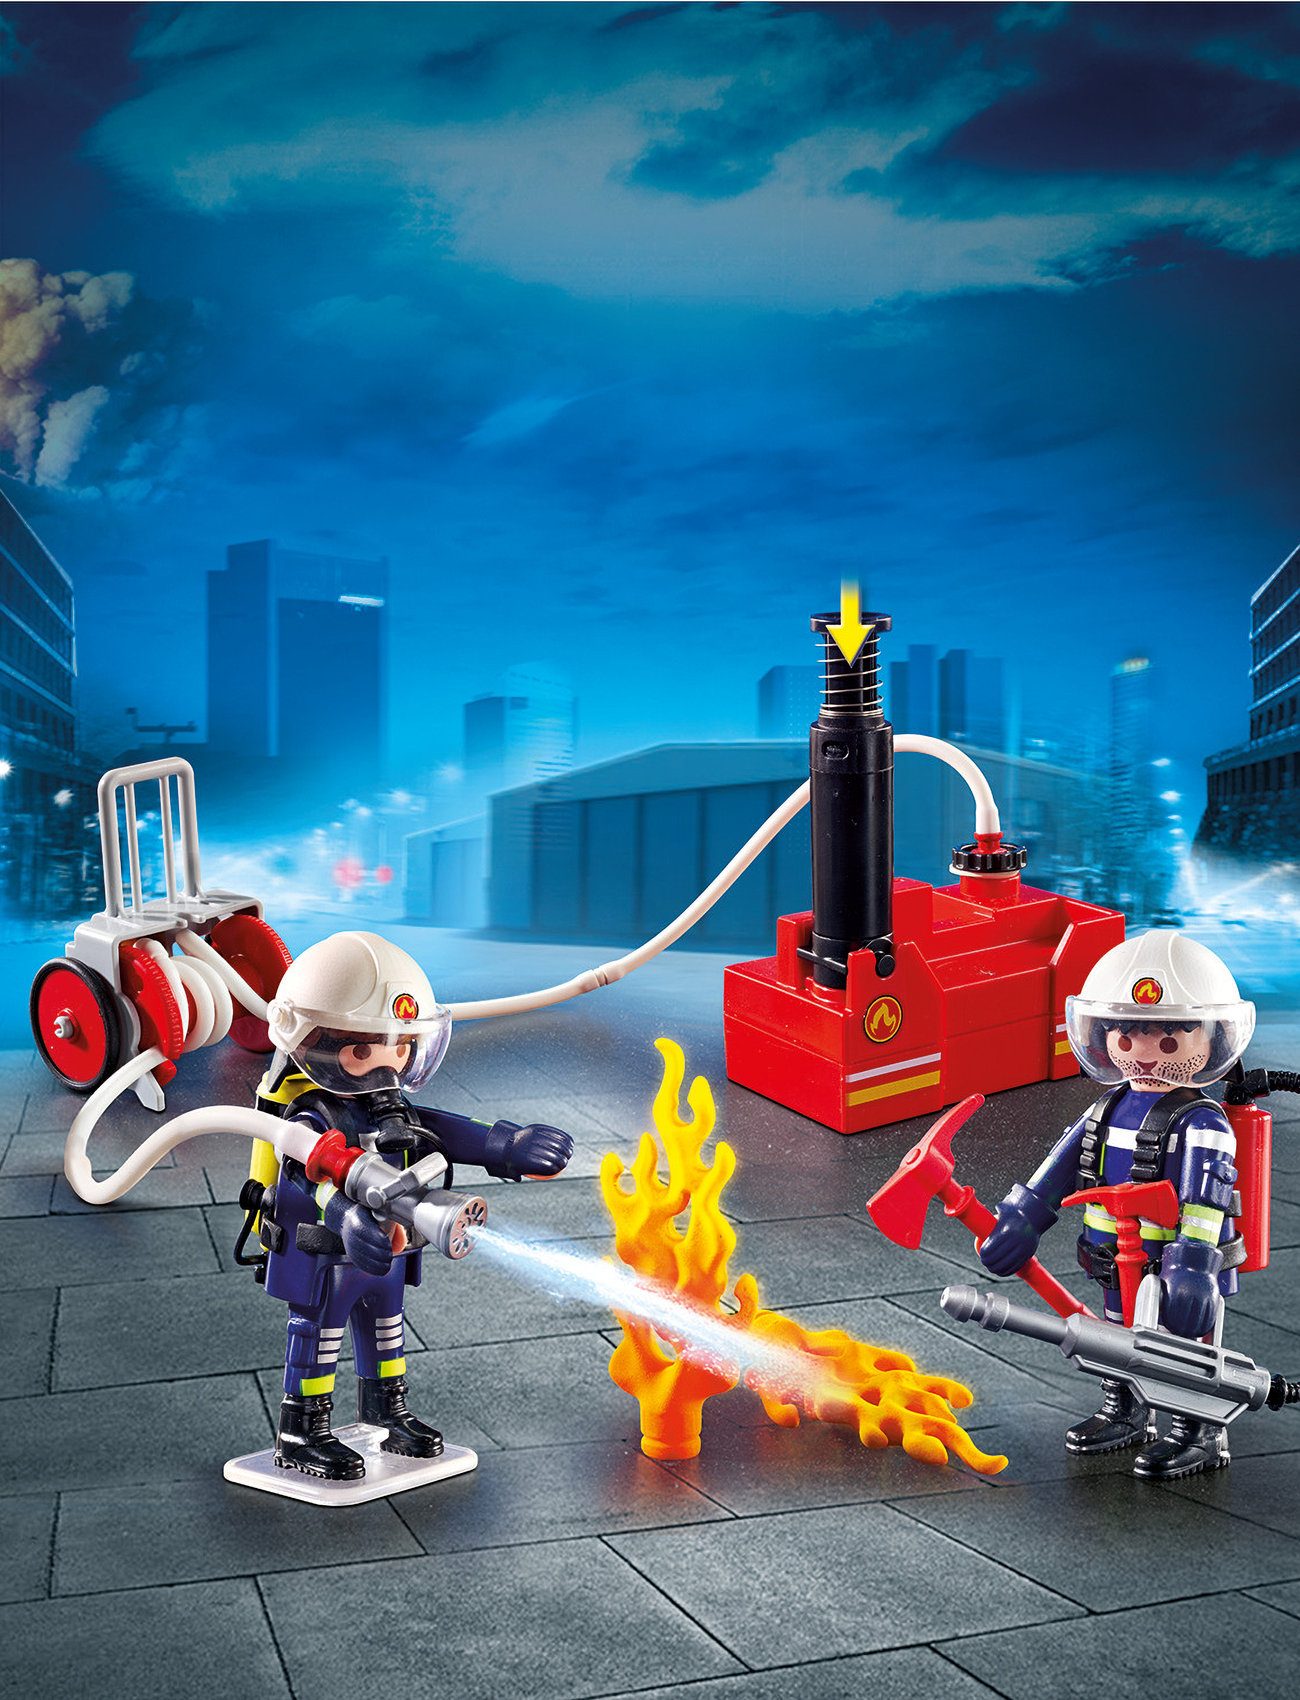 PLAYMOBIL - PLAYMOBIL City Action Firefighters with Water Pump - 9468 - playmobil city action - multicolored - 1